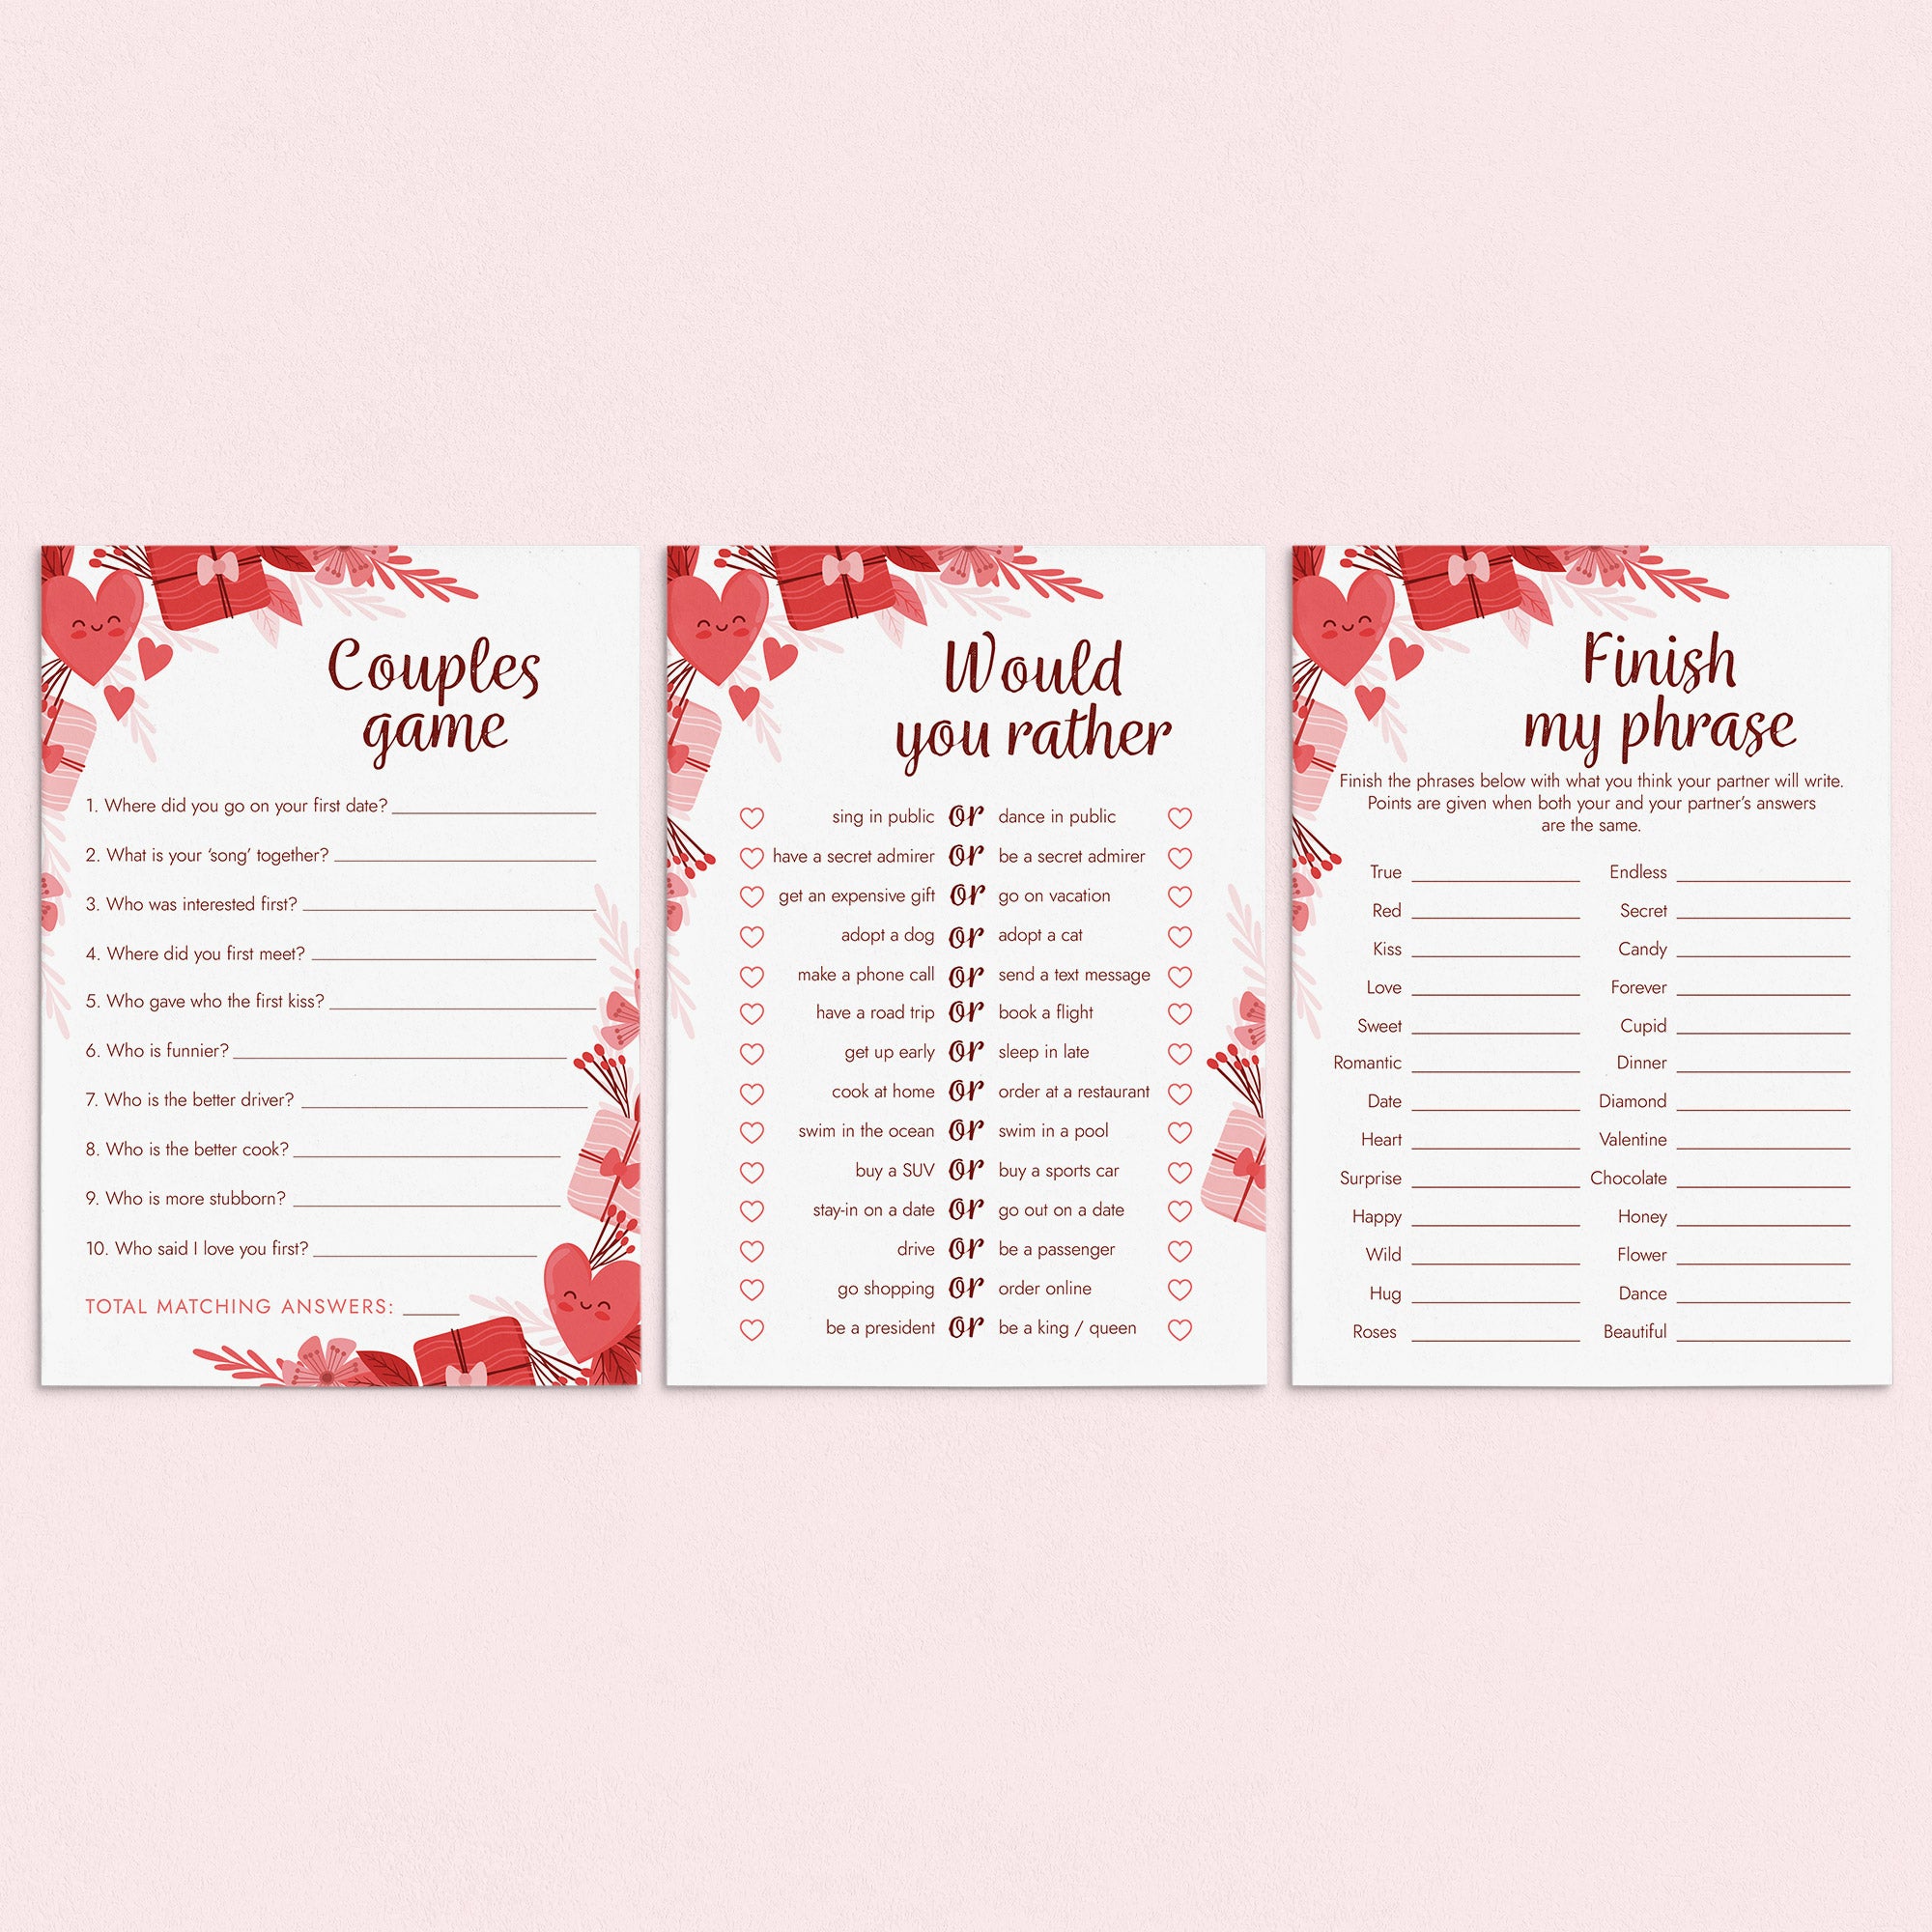 Date Night Couples Games Printable Games for Couples Mr & Mrs Printable Date  Night Romantic Date Digital Download 